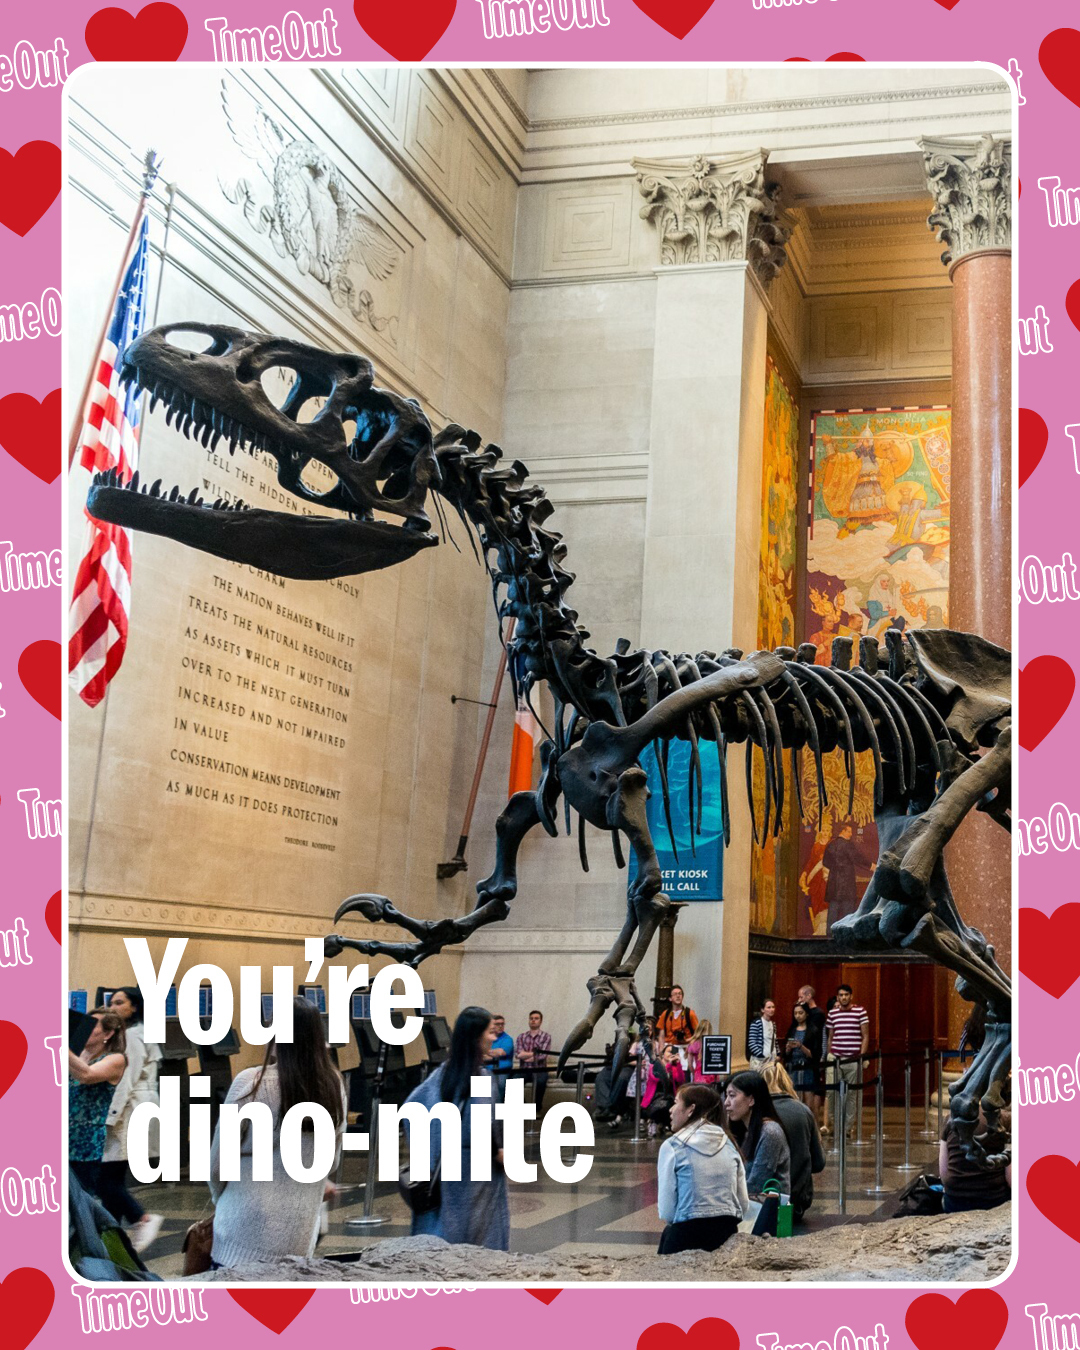 An NYC Valentine card with a dinosaur reading "You're dino-mite."